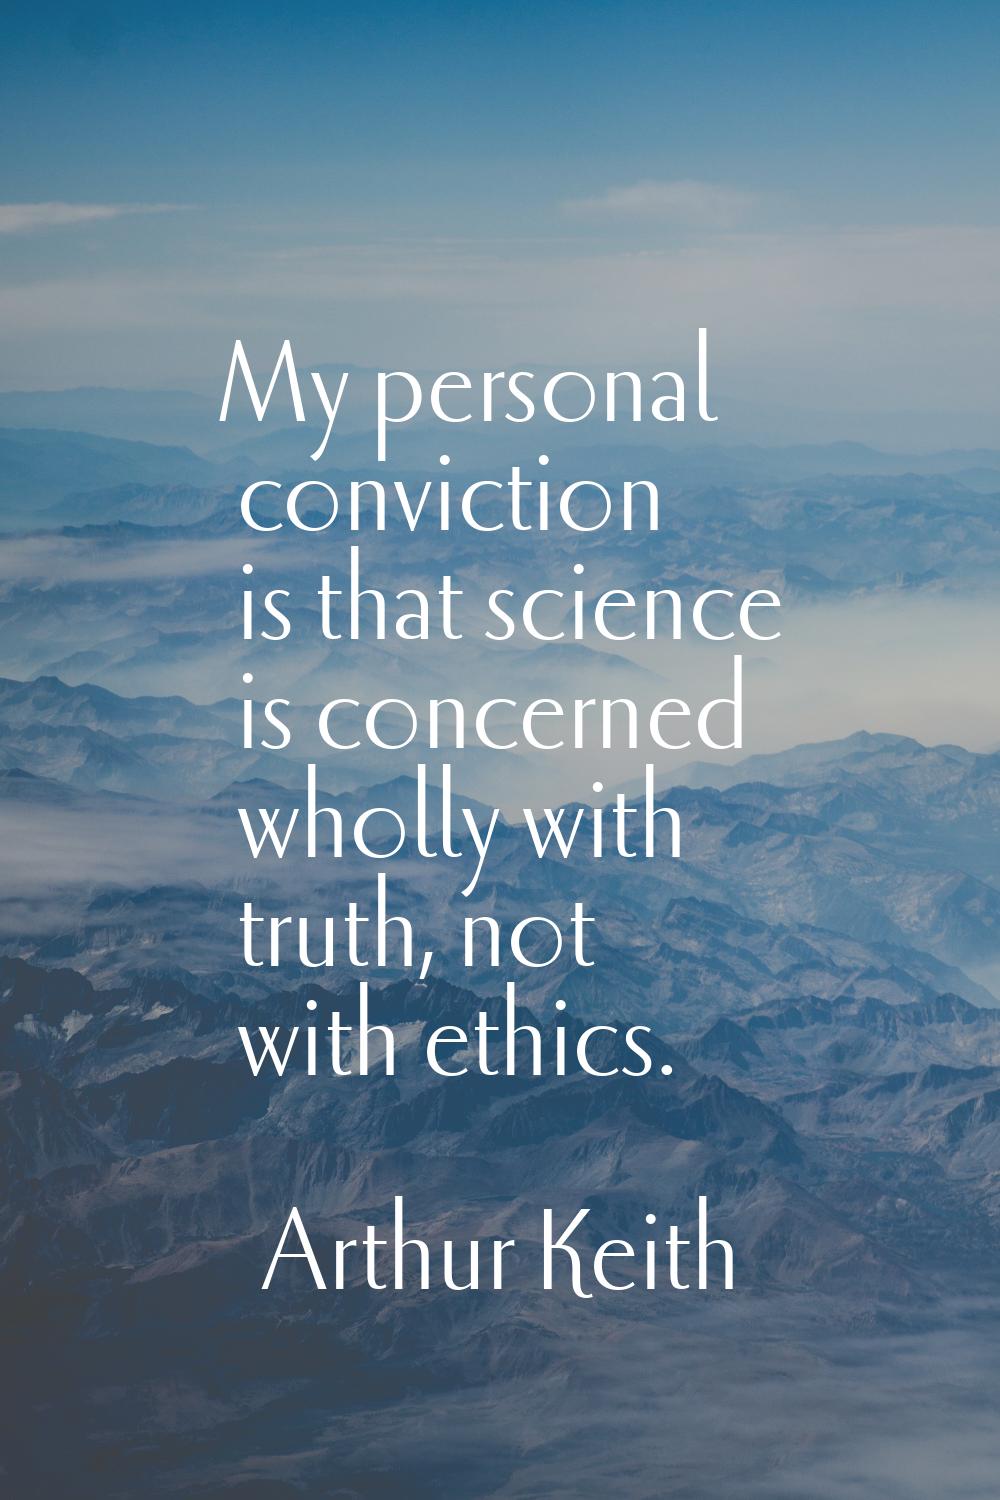 My personal conviction is that science is concerned wholly with truth, not with ethics.